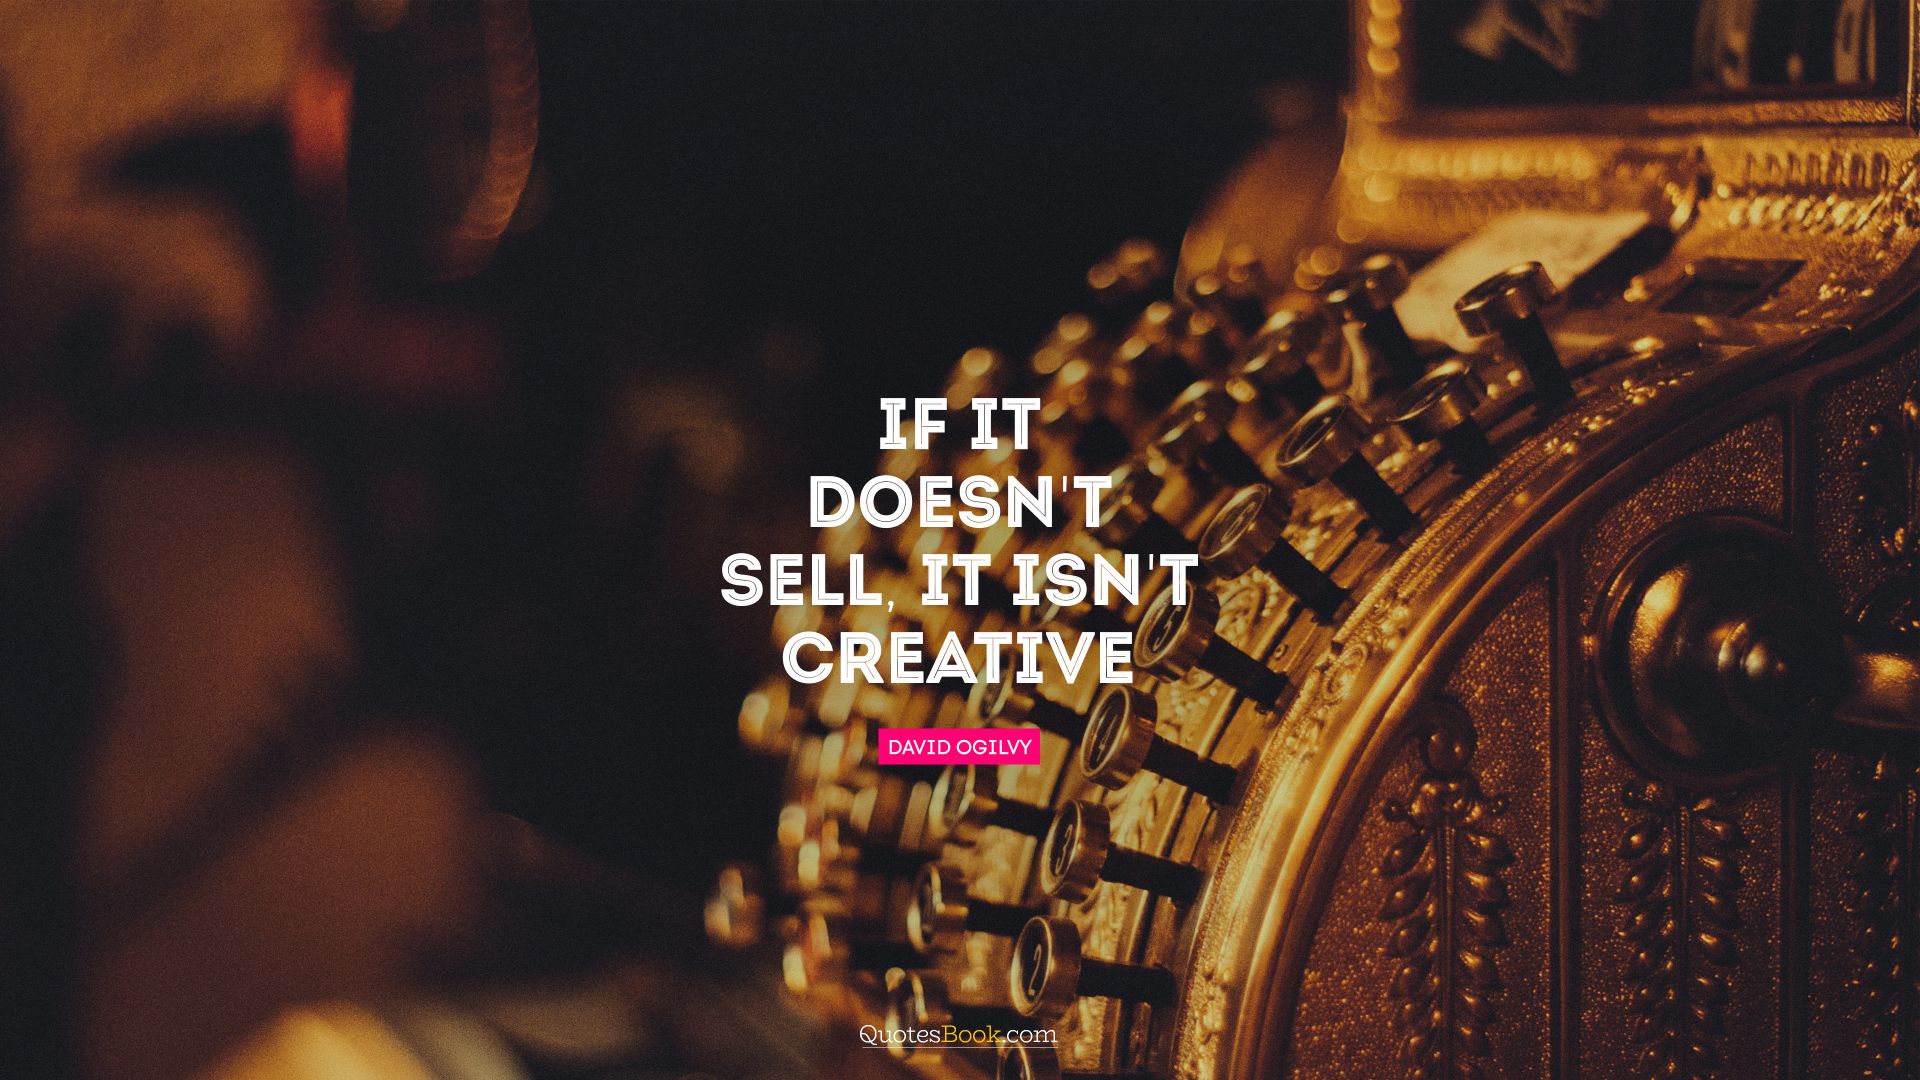 If it doesn't sell, it isn't creative. - Quote by David Ogilvy